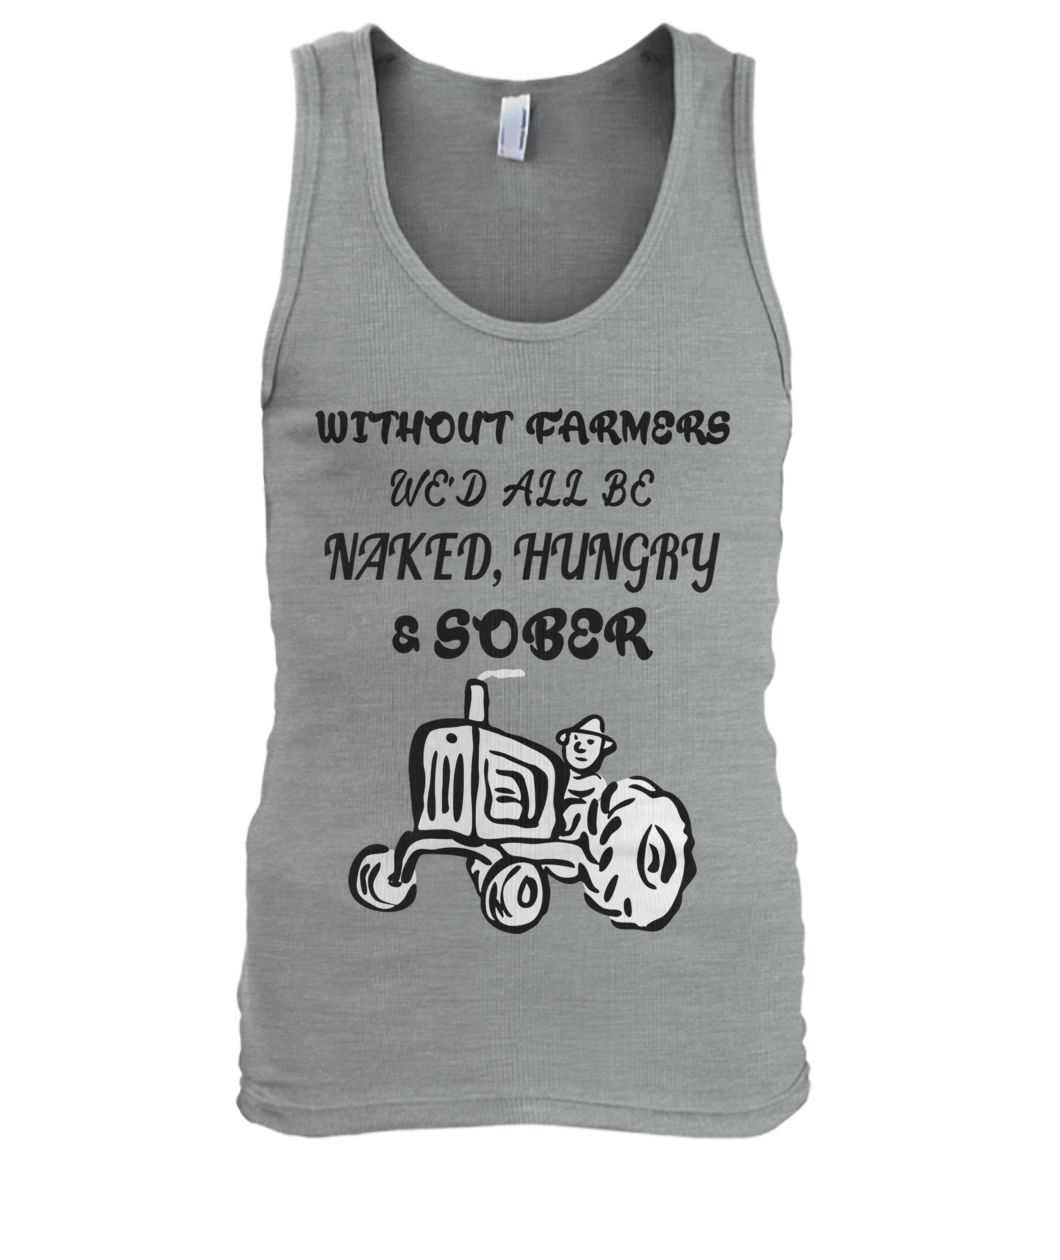 Without farmers we'd all be naked hungry sober tank top